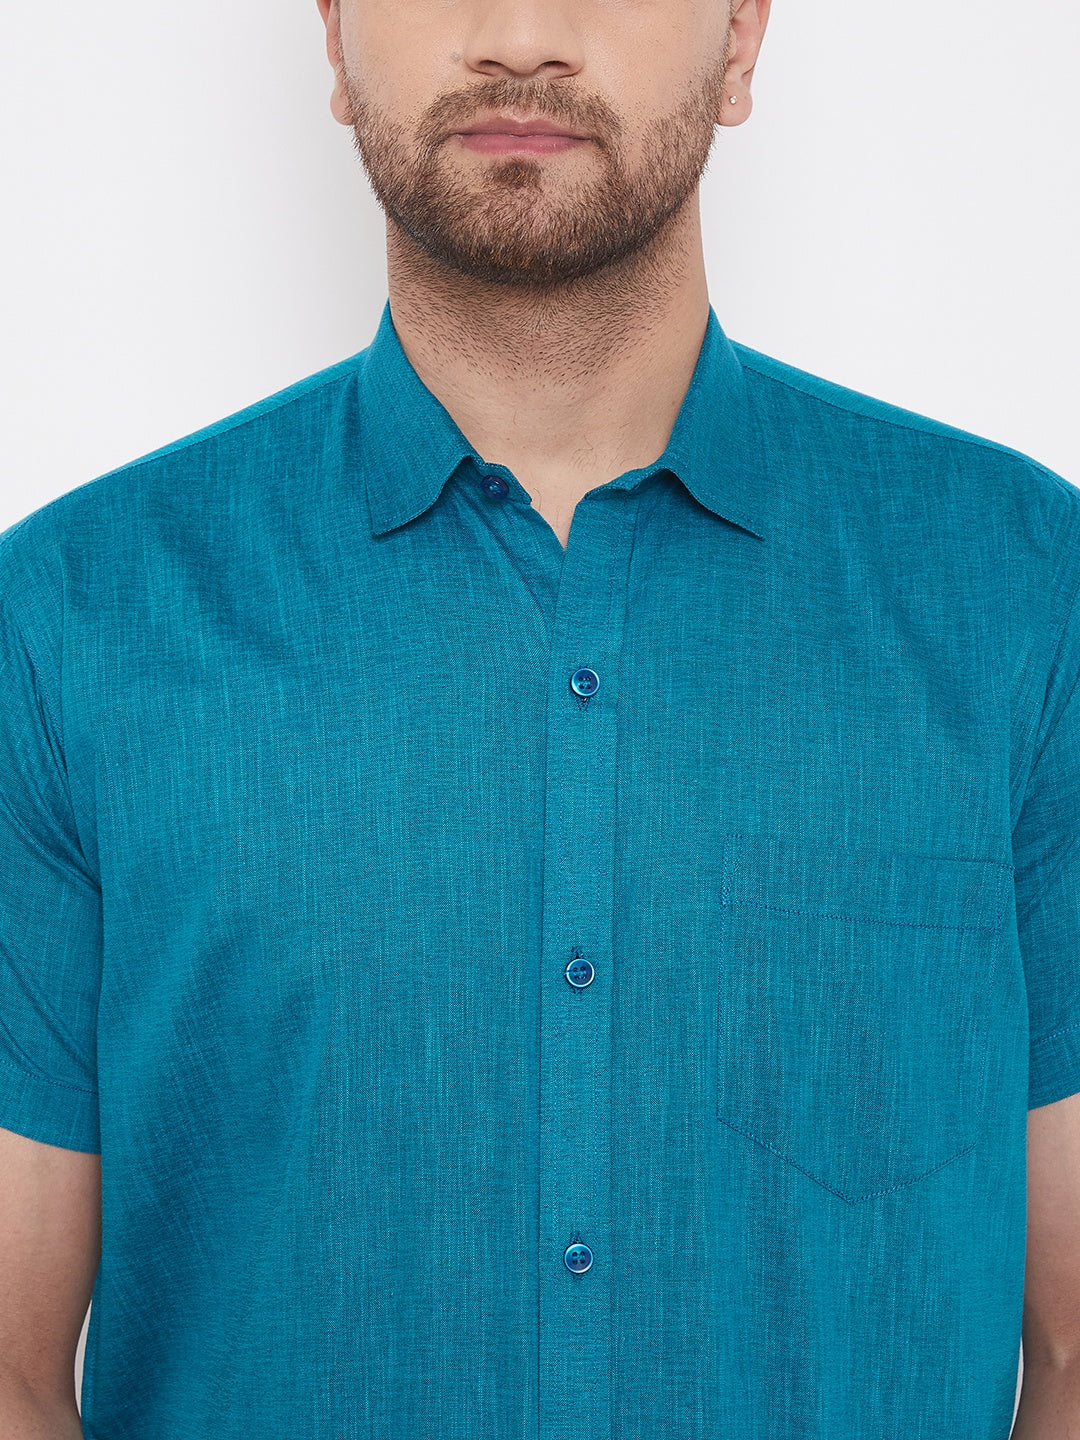 Buy Green Shirts for Men by VASTRAMAY Online